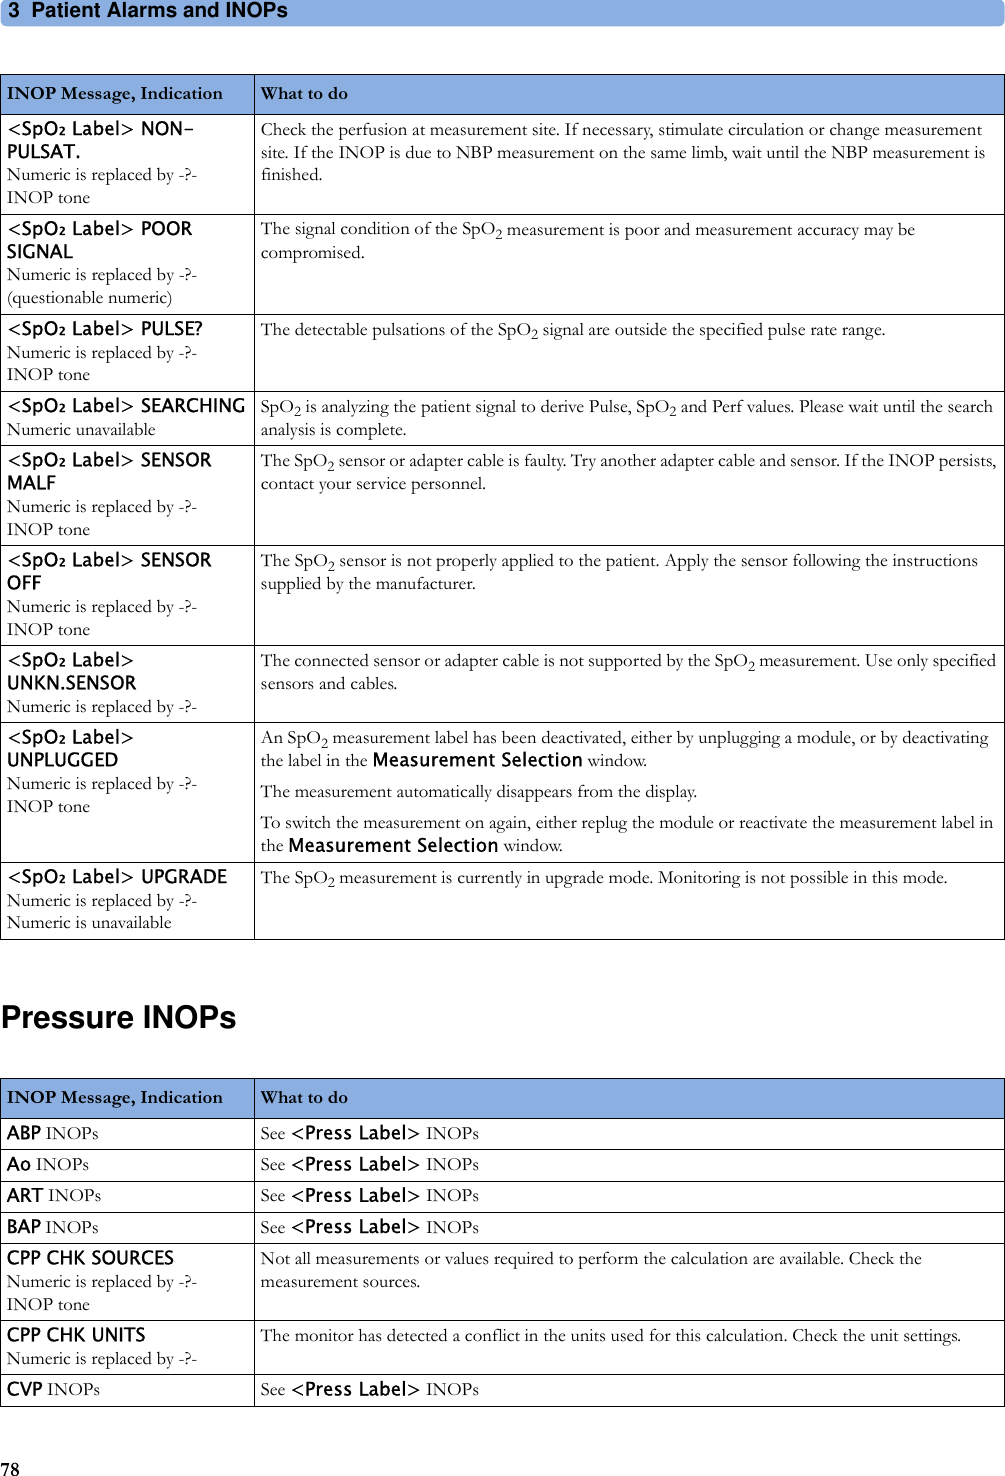 3 Patient Alarms and INOPs78Pressure INOPs&lt;SpO₂ Label&gt; NON-PULSAT.Numeric is replaced by -?-INOP toneCheck the perfusion at measurement site. If necessary, stimulate circulation or change measurement site. If the INOP is due to NBP measurement on the same limb, wait until the NBP measurement is finished.&lt;SpO₂ Label&gt; POOR SIGNALNumeric is replaced by -?-(questionable numeric)The signal condition of the SpO2 measurement is poor and measurement accuracy may be compromised.&lt;SpO₂ Label&gt; PULSE?Numeric is replaced by -?-INOP toneThe detectable pulsations of the SpO2 signal are outside the specified pulse rate range.&lt;SpO₂ Label&gt; SEARCHINGNumeric unavailableSpO2 is analyzing the patient signal to derive Pulse, SpO2 and Perf values. Please wait until the search analysis is complete.&lt;SpO₂ Label&gt; SENSOR MALFNumeric is replaced by -?-INOP toneThe SpO2 sensor or adapter cable is faulty. Try another adapter cable and sensor. If the INOP persists, contact your service personnel.&lt;SpO₂ Label&gt; SENSOR OFFNumeric is replaced by -?-INOP toneThe SpO2 sensor is not properly applied to the patient. Apply the sensor following the instructions supplied by the manufacturer.&lt;SpO₂ Label&gt; UNKN.SENSORNumeric is replaced by -?-The connected sensor or adapter cable is not supported by the SpO2 measurement. Use only specified sensors and cables.&lt;SpO₂ Label&gt; UNPLUGGEDNumeric is replaced by -?-INOP toneAn SpO2 measurement label has been deactivated, either by unplugging a module, or by deactivating the label in the Measurement Selection window.The measurement automatically disappears from the display.To switch the measurement on again, either replug the module or reactivate the measurement label in the Measurement Selection window.&lt;SpO₂ Label&gt; UPGRADENumeric is replaced by -?-Numeric is unavailableThe SpO2 measurement is currently in upgrade mode. Monitoring is not possible in this mode.INOP Message, Indication What to do INOP Message, Indication What to do ABP INOPs See &lt;Press Label&gt; INOPsAo INOPs See &lt;Press Label&gt; INOPsART INOPs See &lt;Press Label&gt; INOPsBAP INOPs See &lt;Press Label&gt; INOPsCPP CHK SOURCESNumeric is replaced by -?-INOP toneNot all measurements or values required to perform the calculation are available. Check the measurement sources.CPP CHK UNITSNumeric is replaced by -?-The monitor has detected a conflict in the units used for this calculation. Check the unit settings.CVP INOPs See &lt;Press Label&gt; INOPs